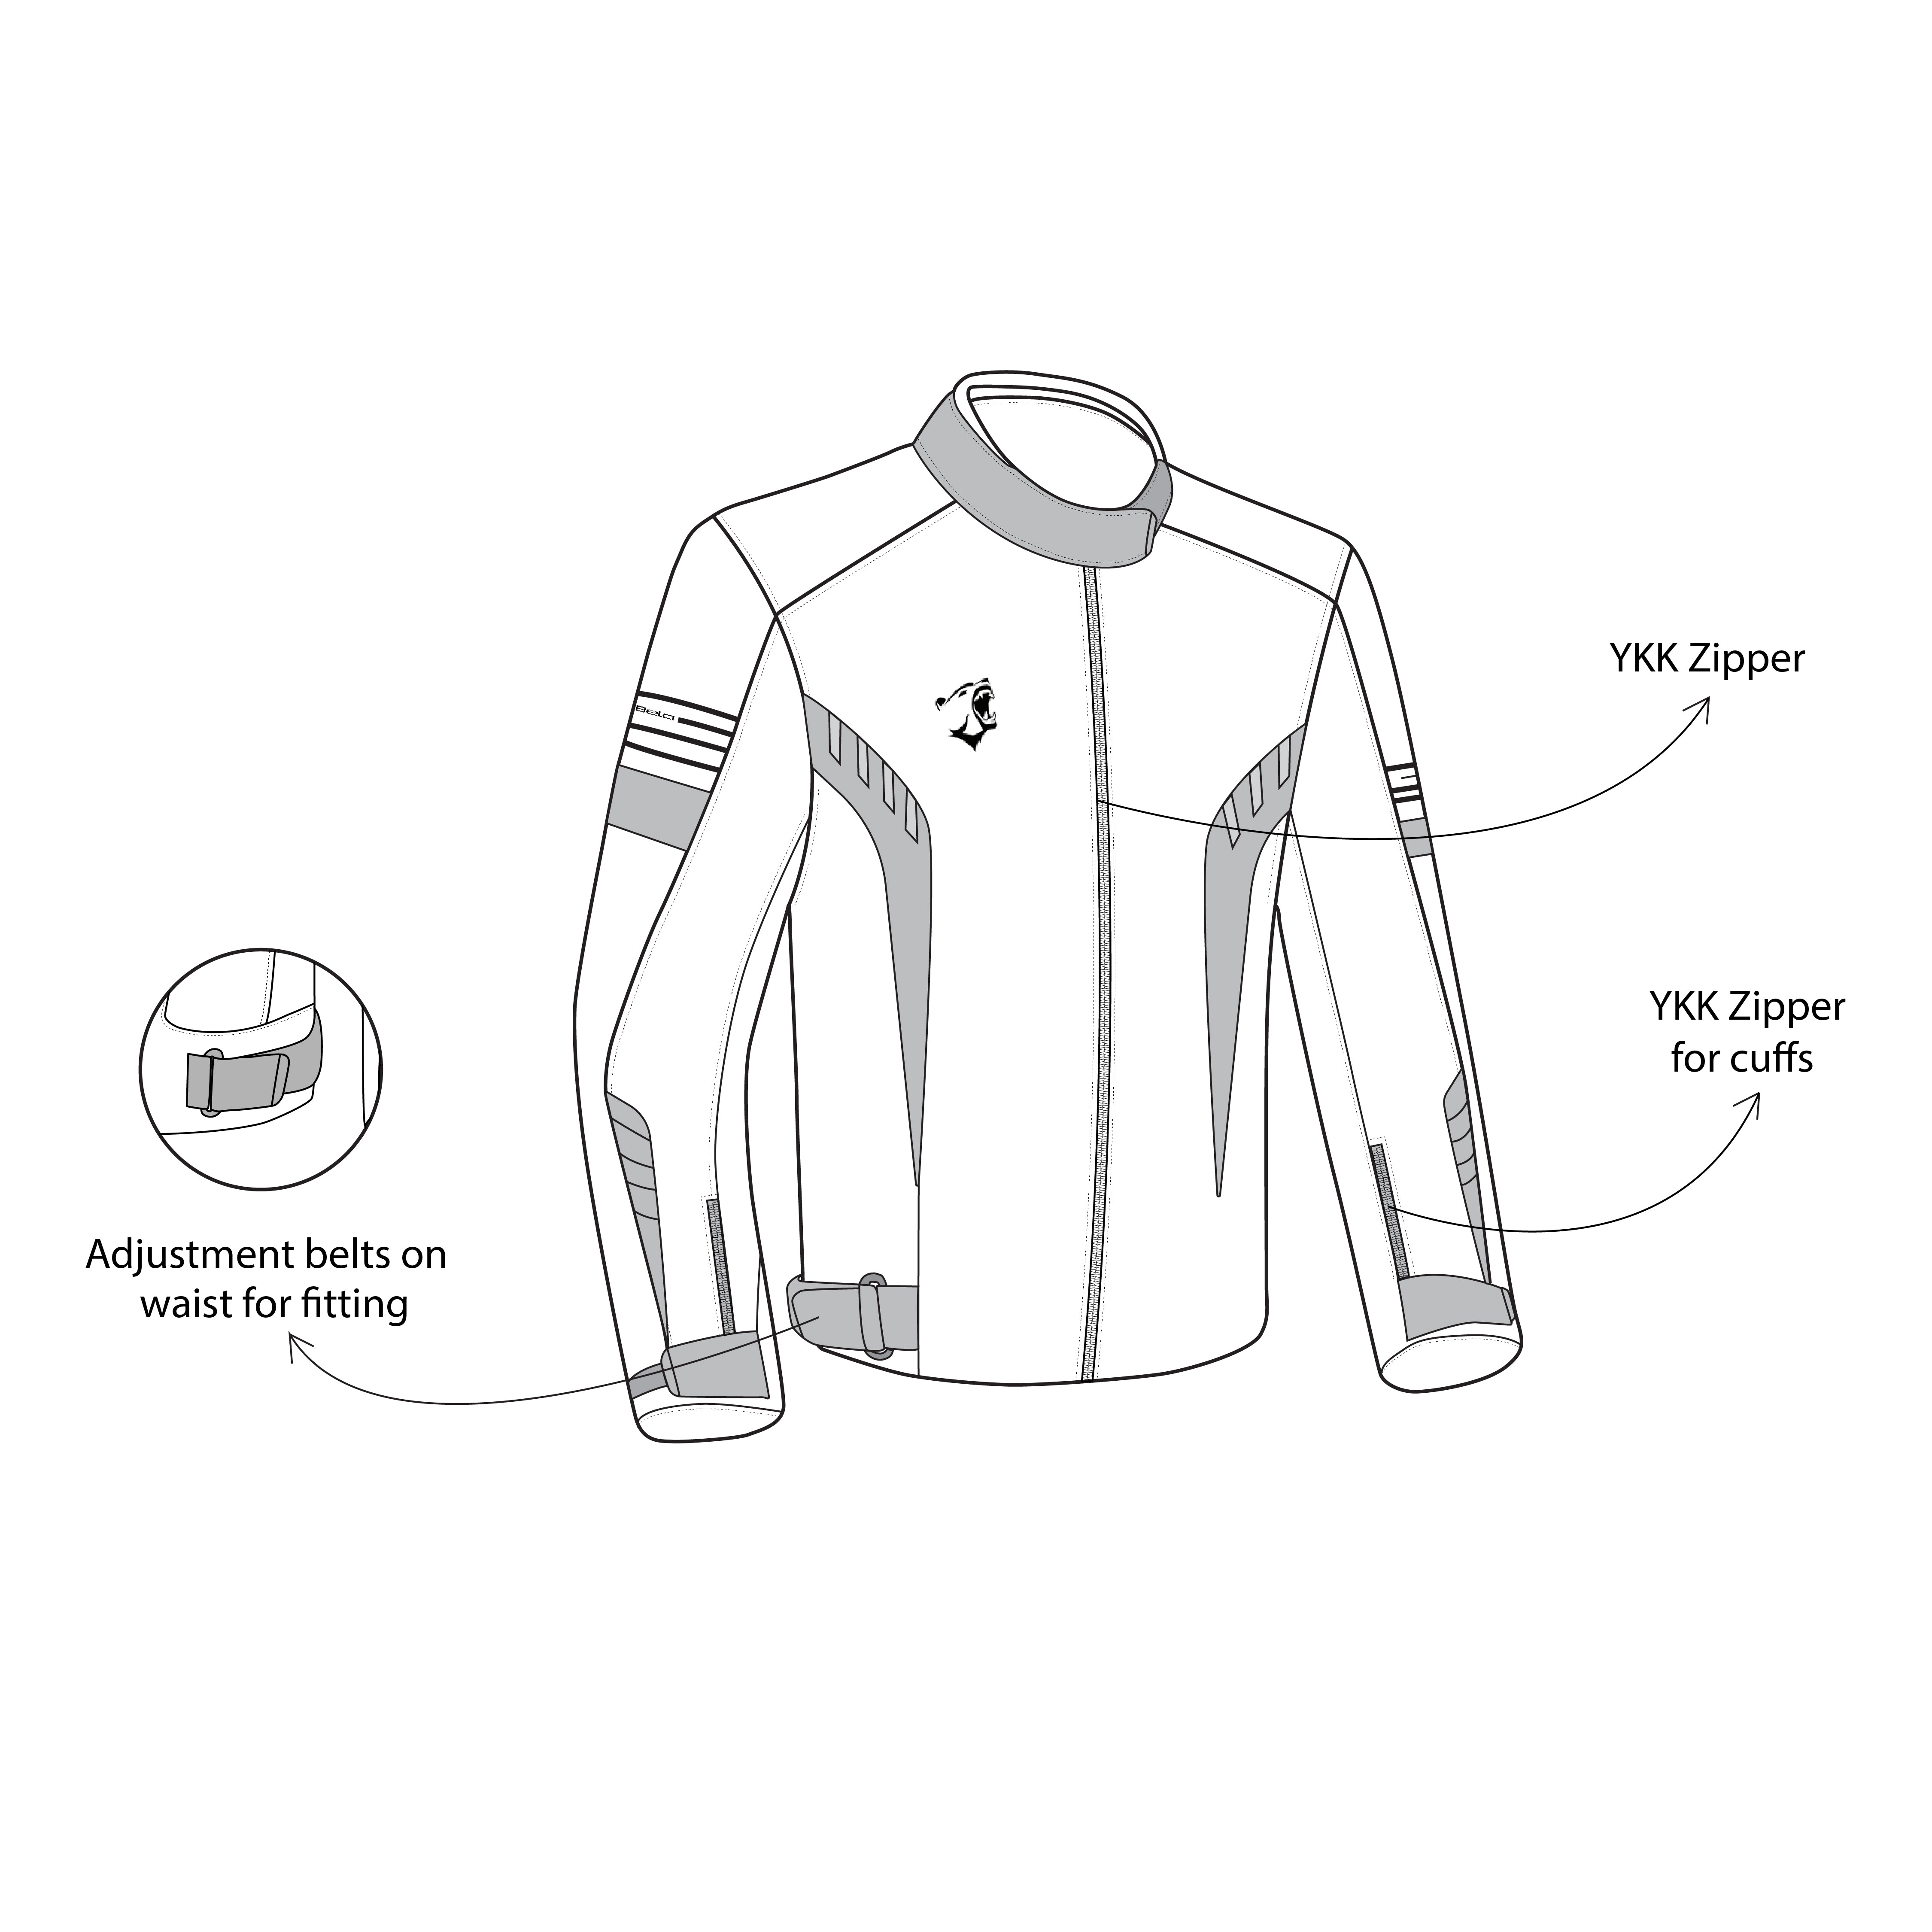 infographic sketch bela bradley textile jacket black, yellow and flouro top front side view